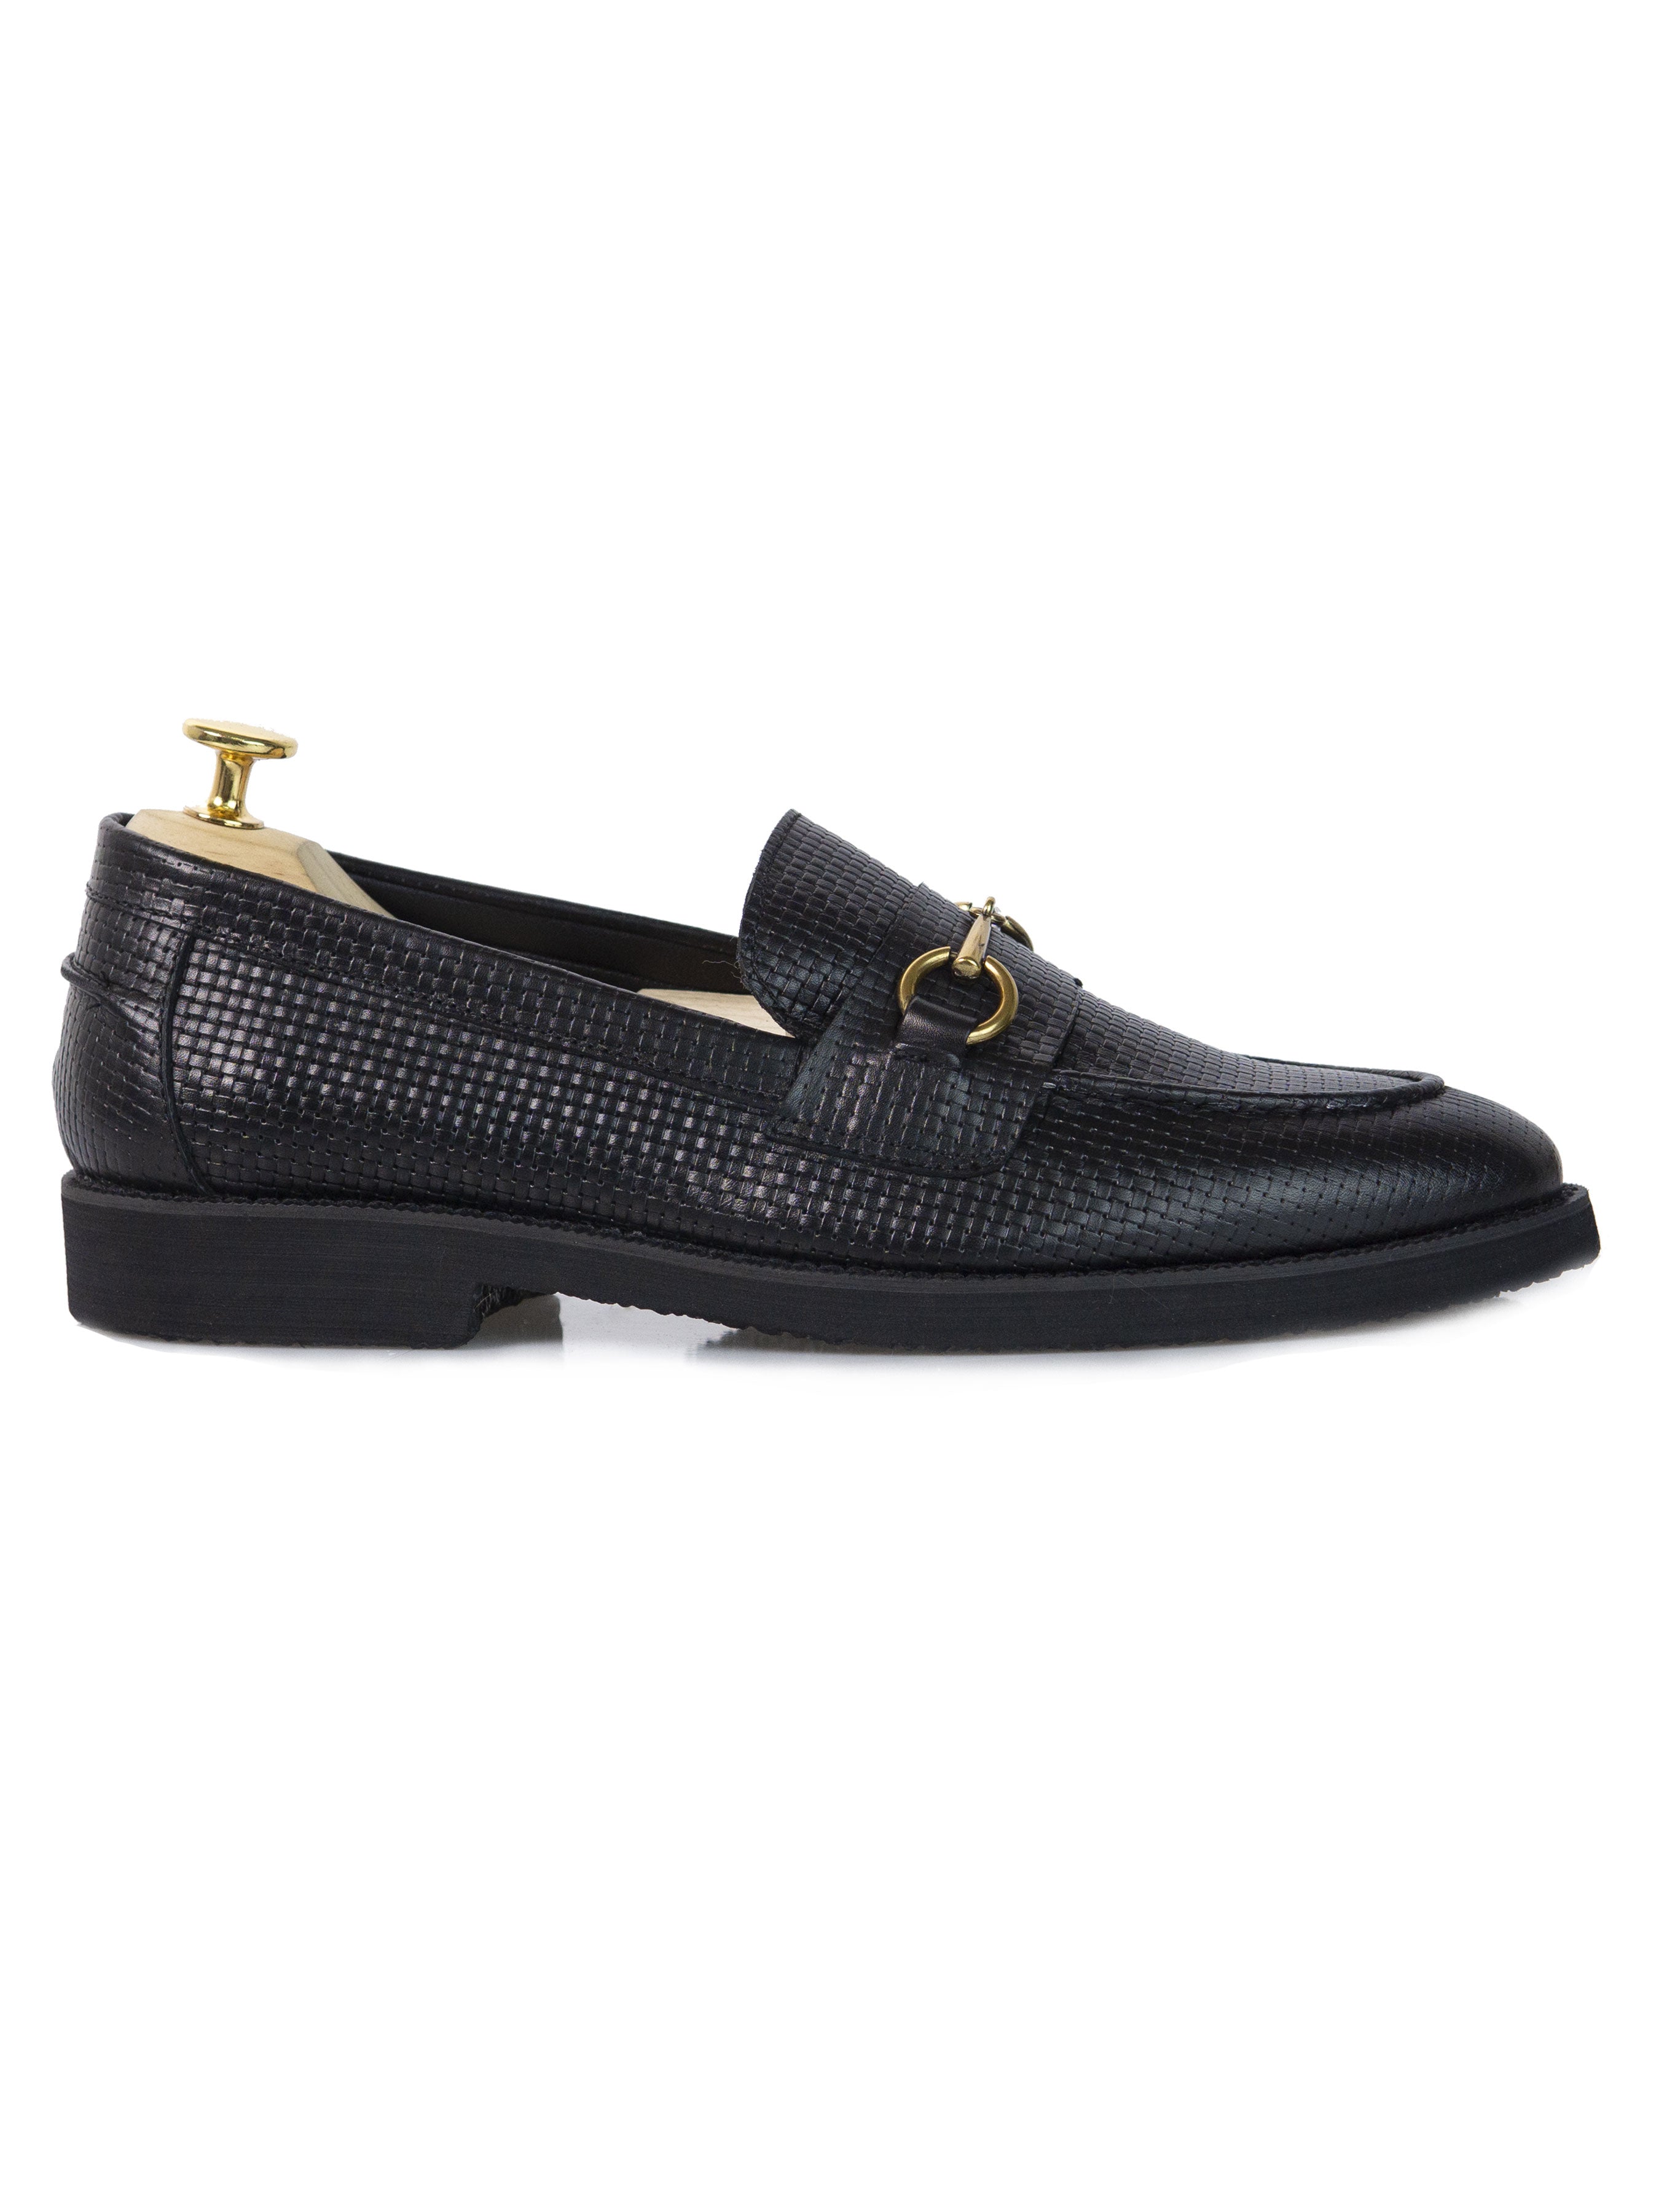 Penny Loafer Horsebit Buckle - Black Woven Leather (Crepe Sole) - Zeve Shoes